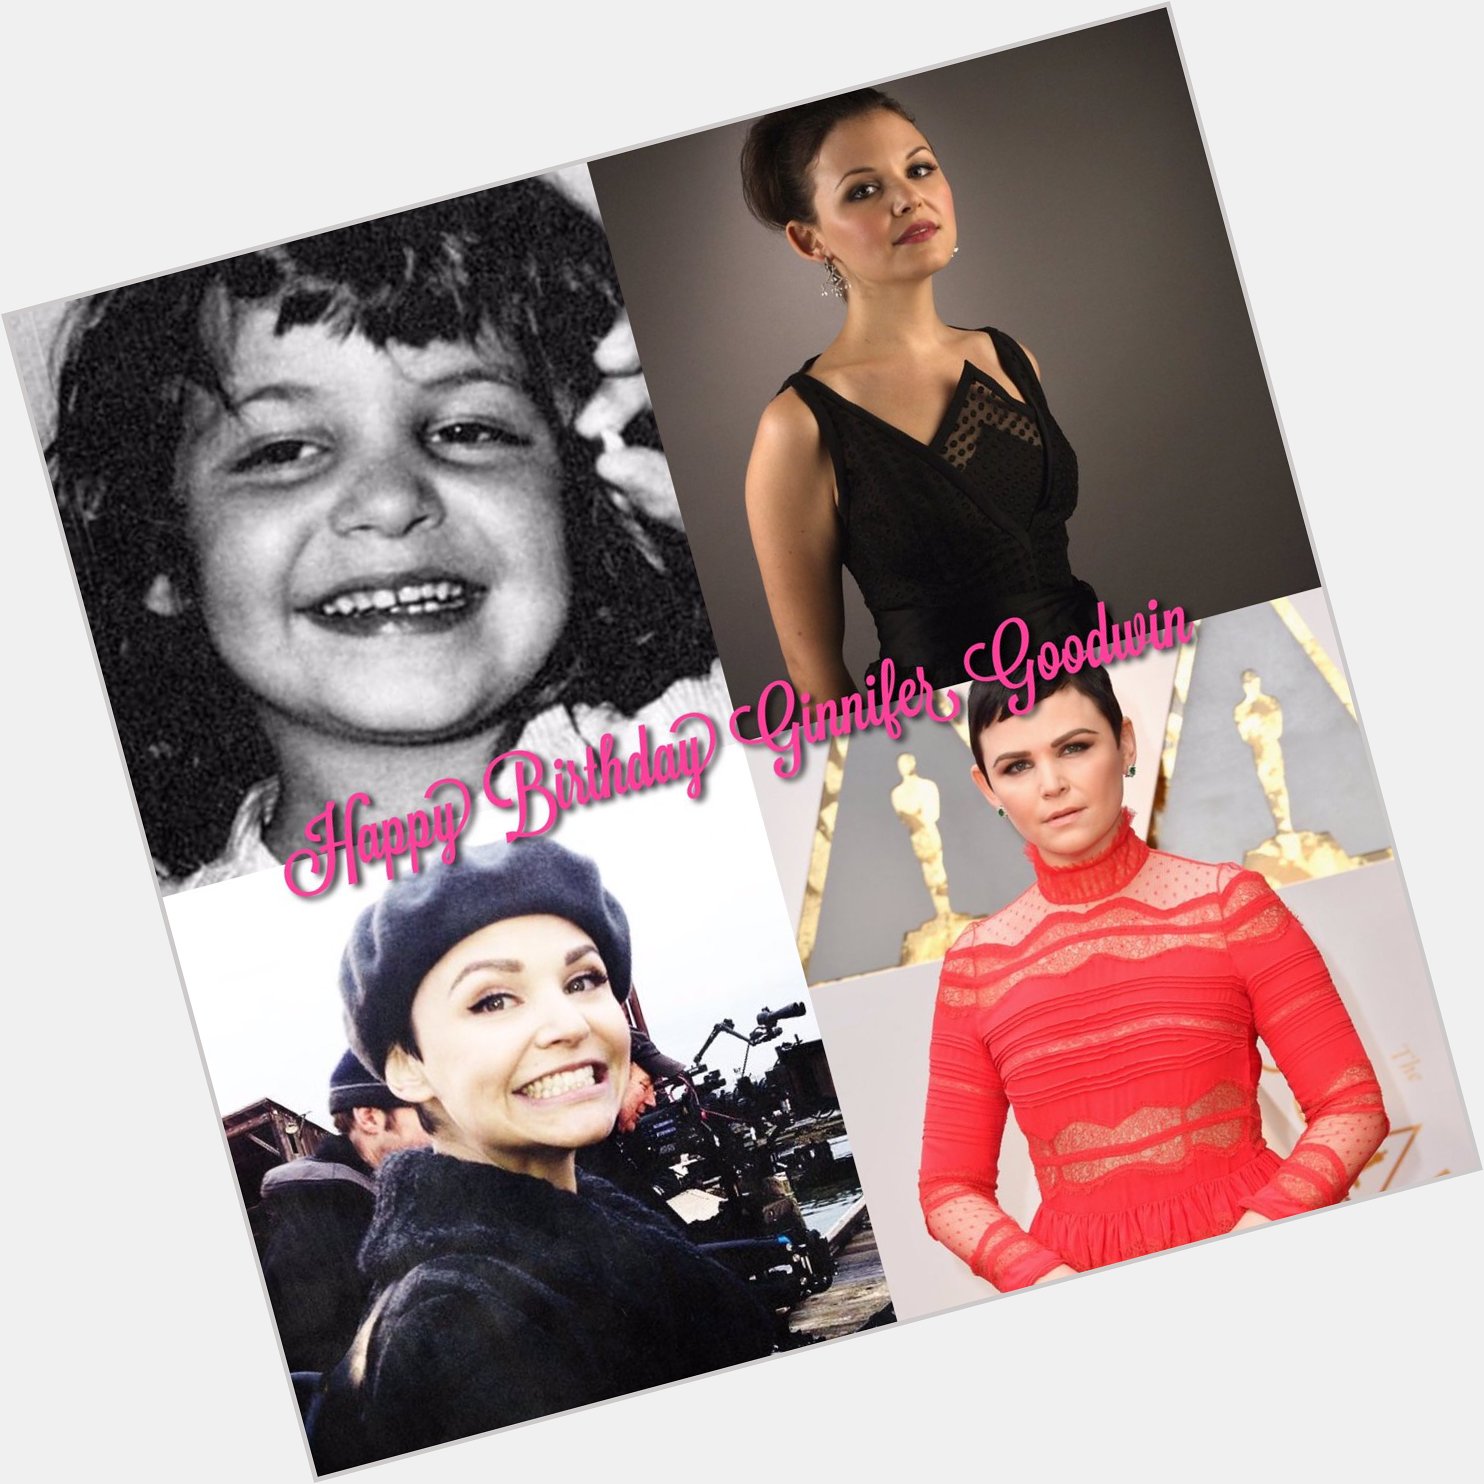 Happy Birthday to one of my favorite actresses: the talented, funny and beautiful Ginnifer Goodwin!   